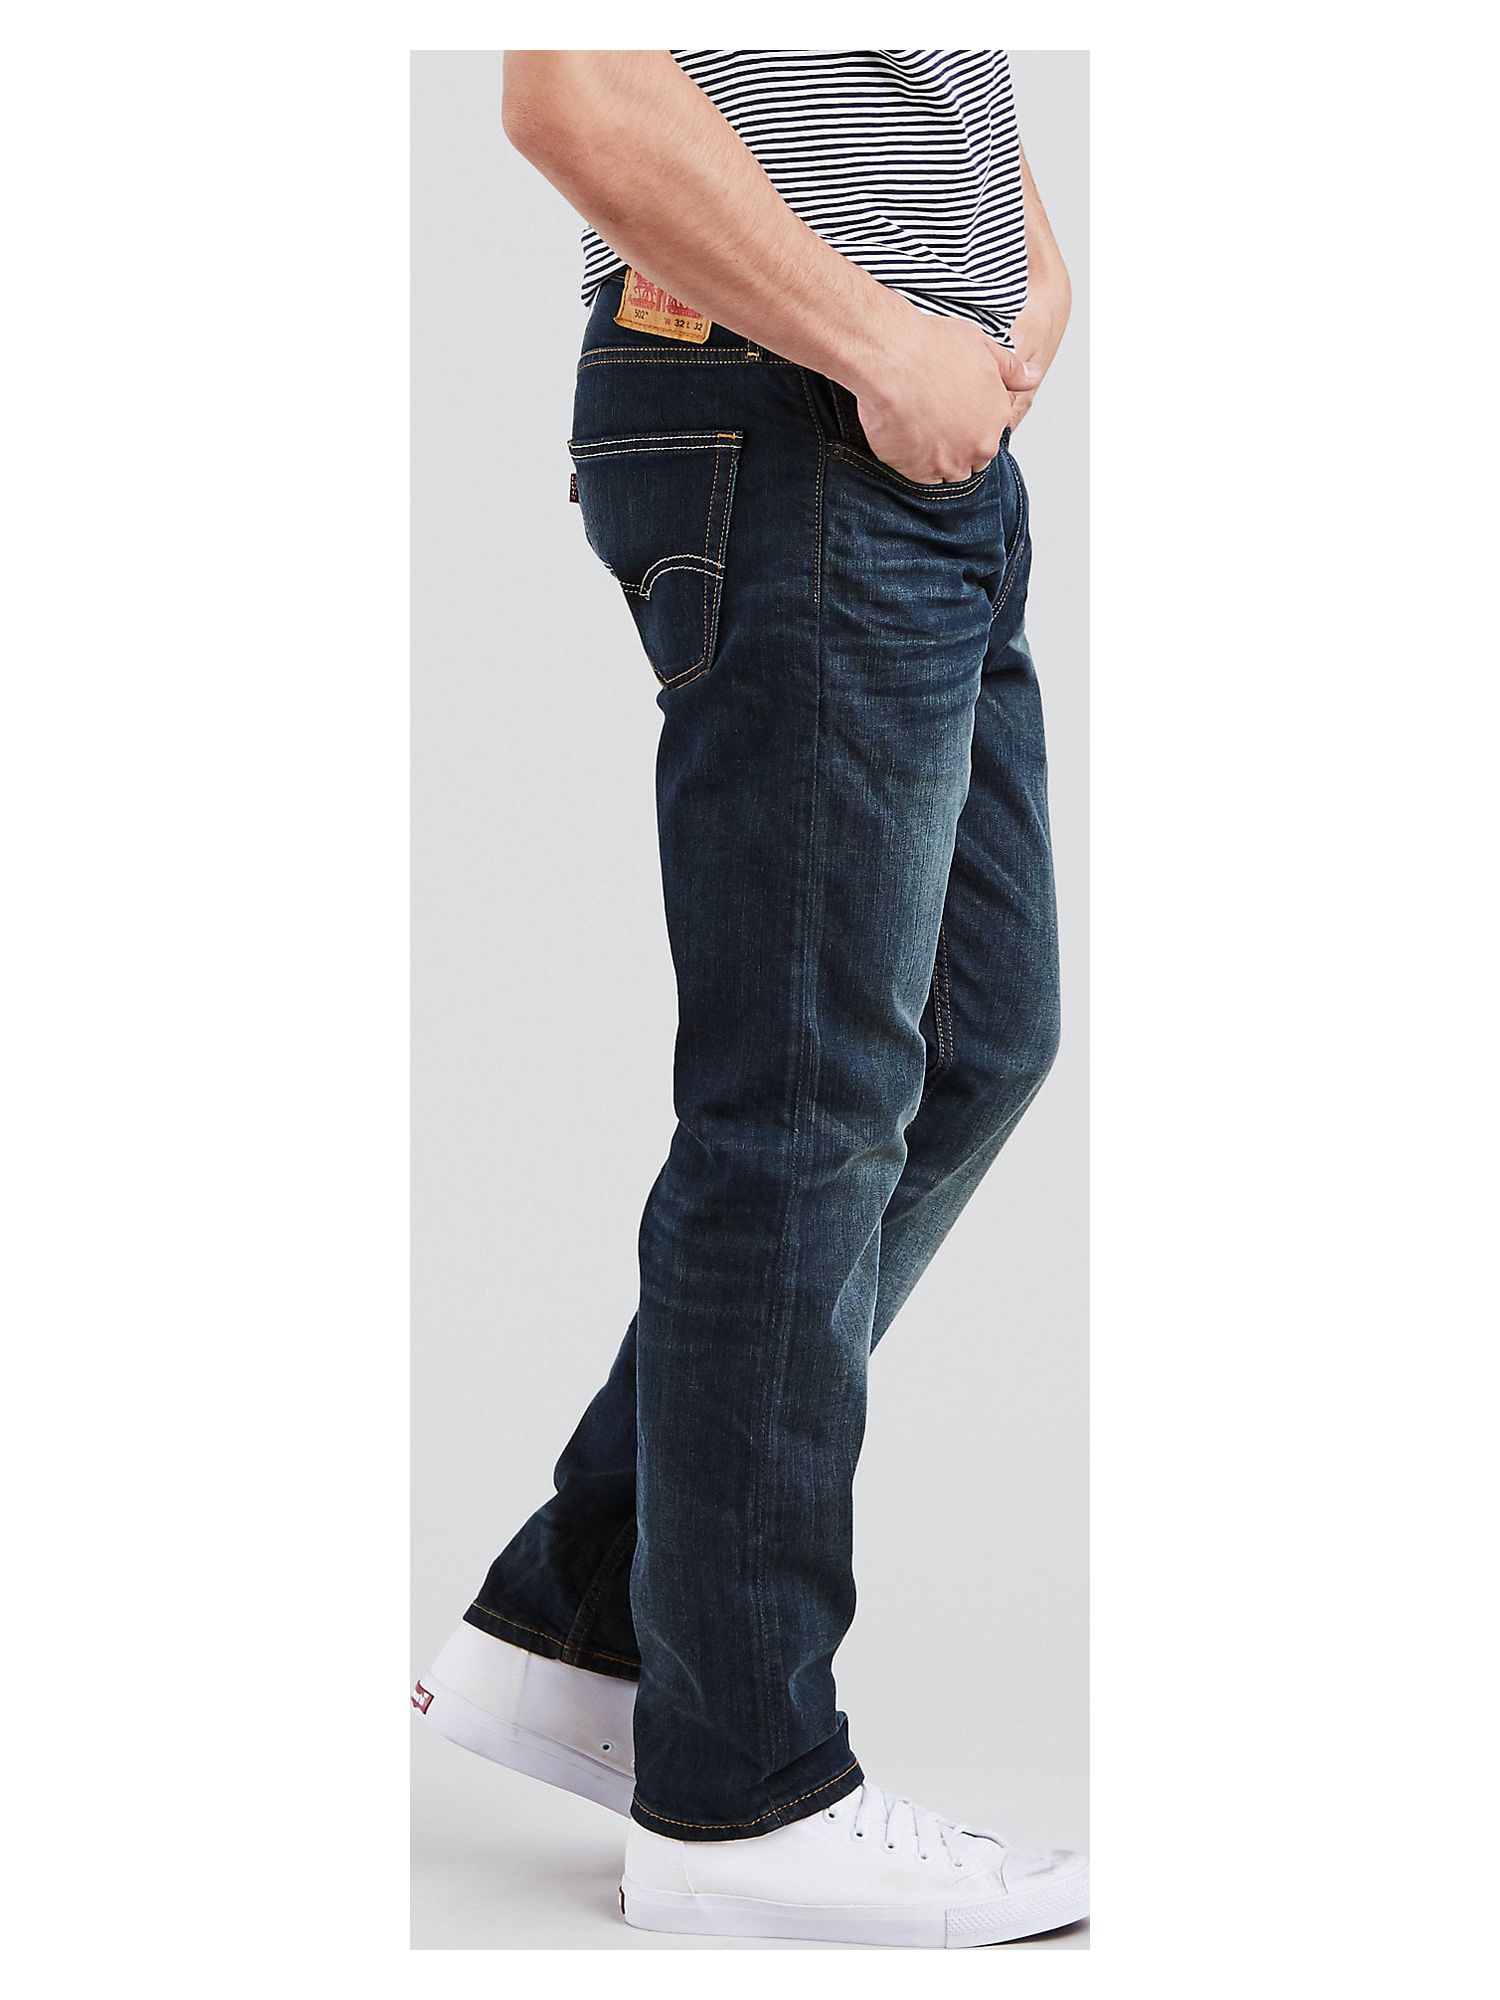 Levi's Mens 502 Regular Fit Stretch Tapered Jeans - image 3 of 7